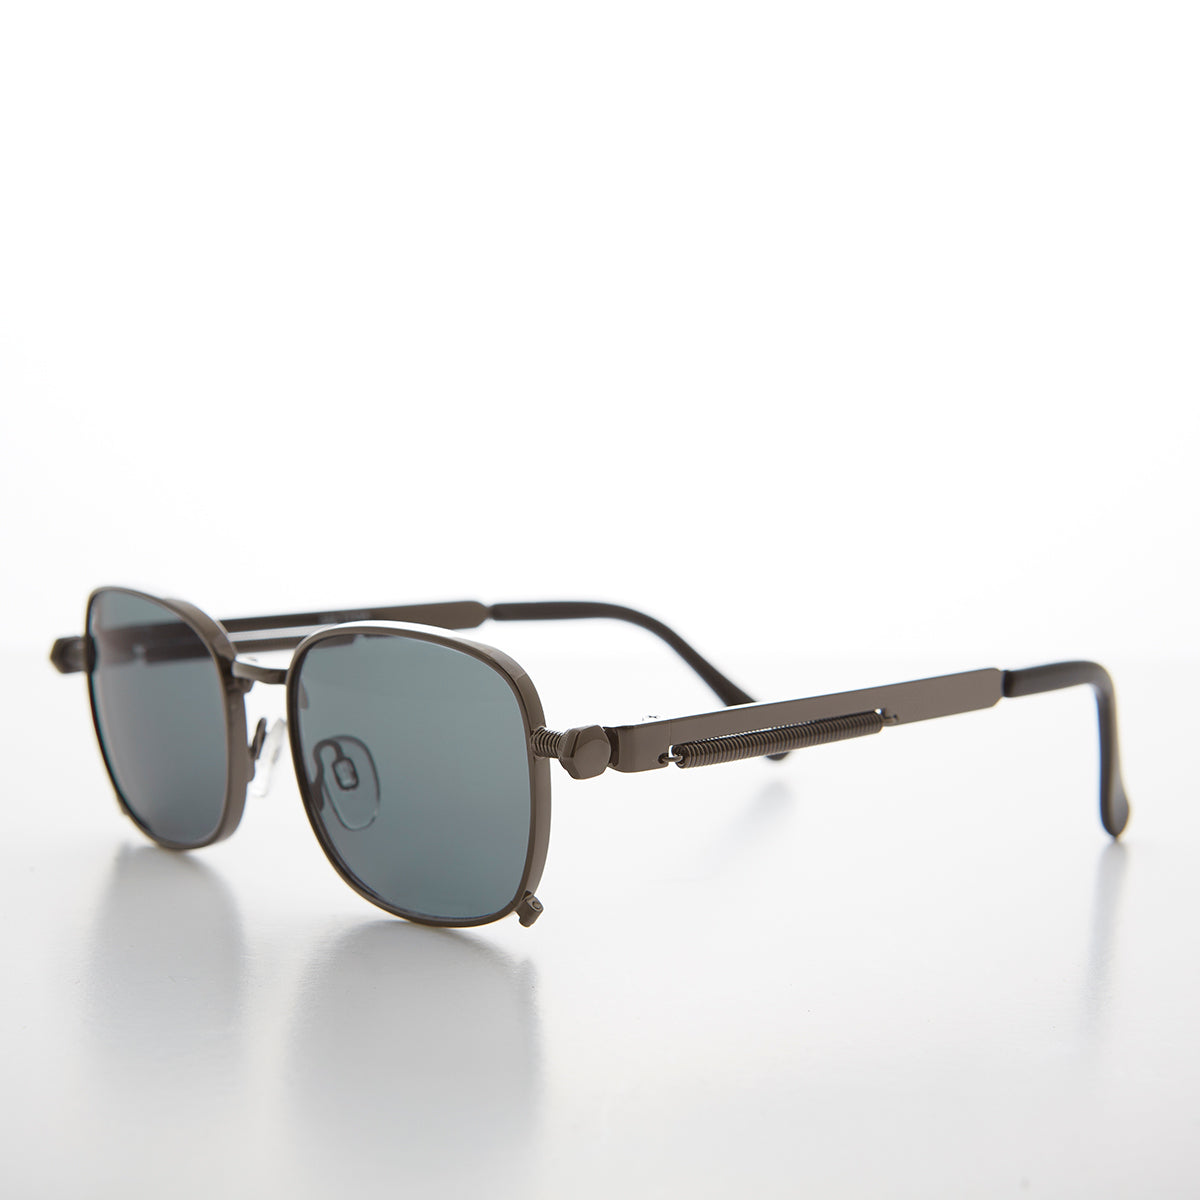 Tailored Steampunk Sunglasses with Industrial Temples